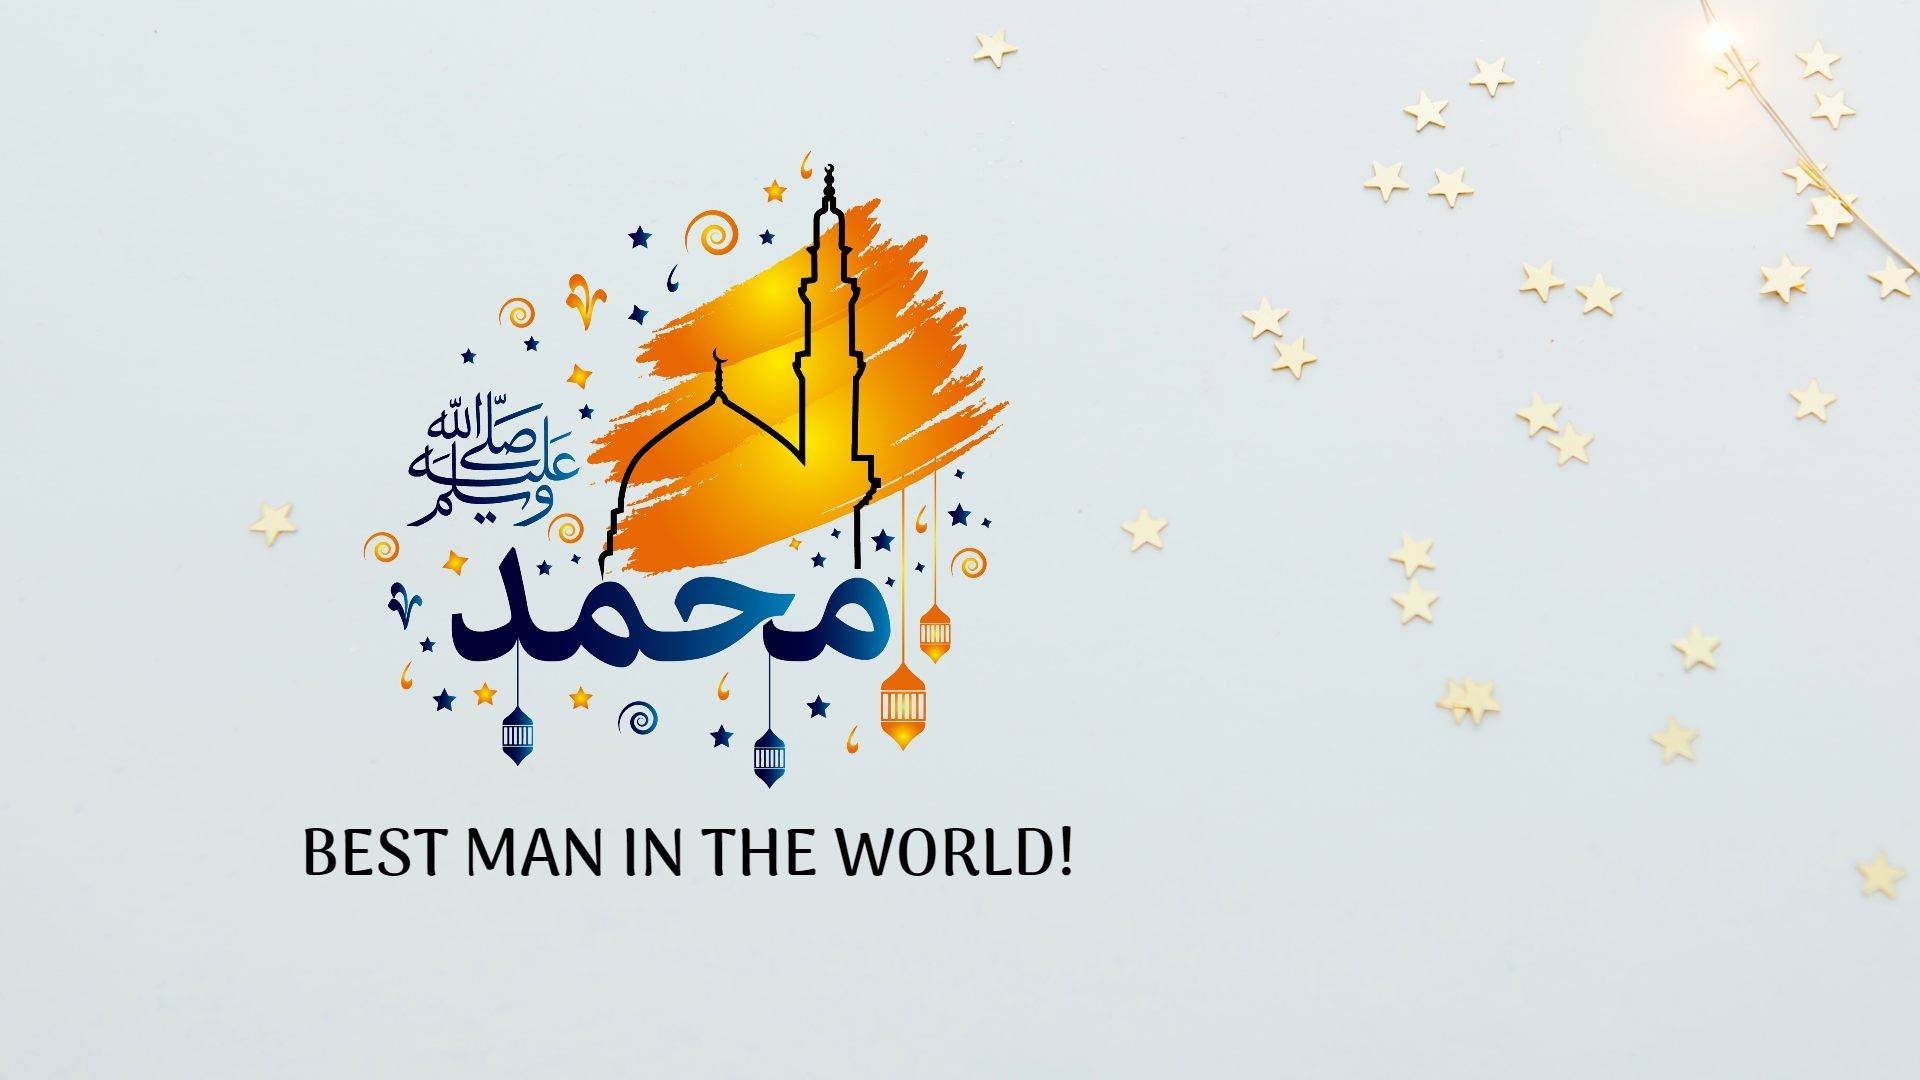 Google Ranks Prophet Muhammad as The Best Man In The World